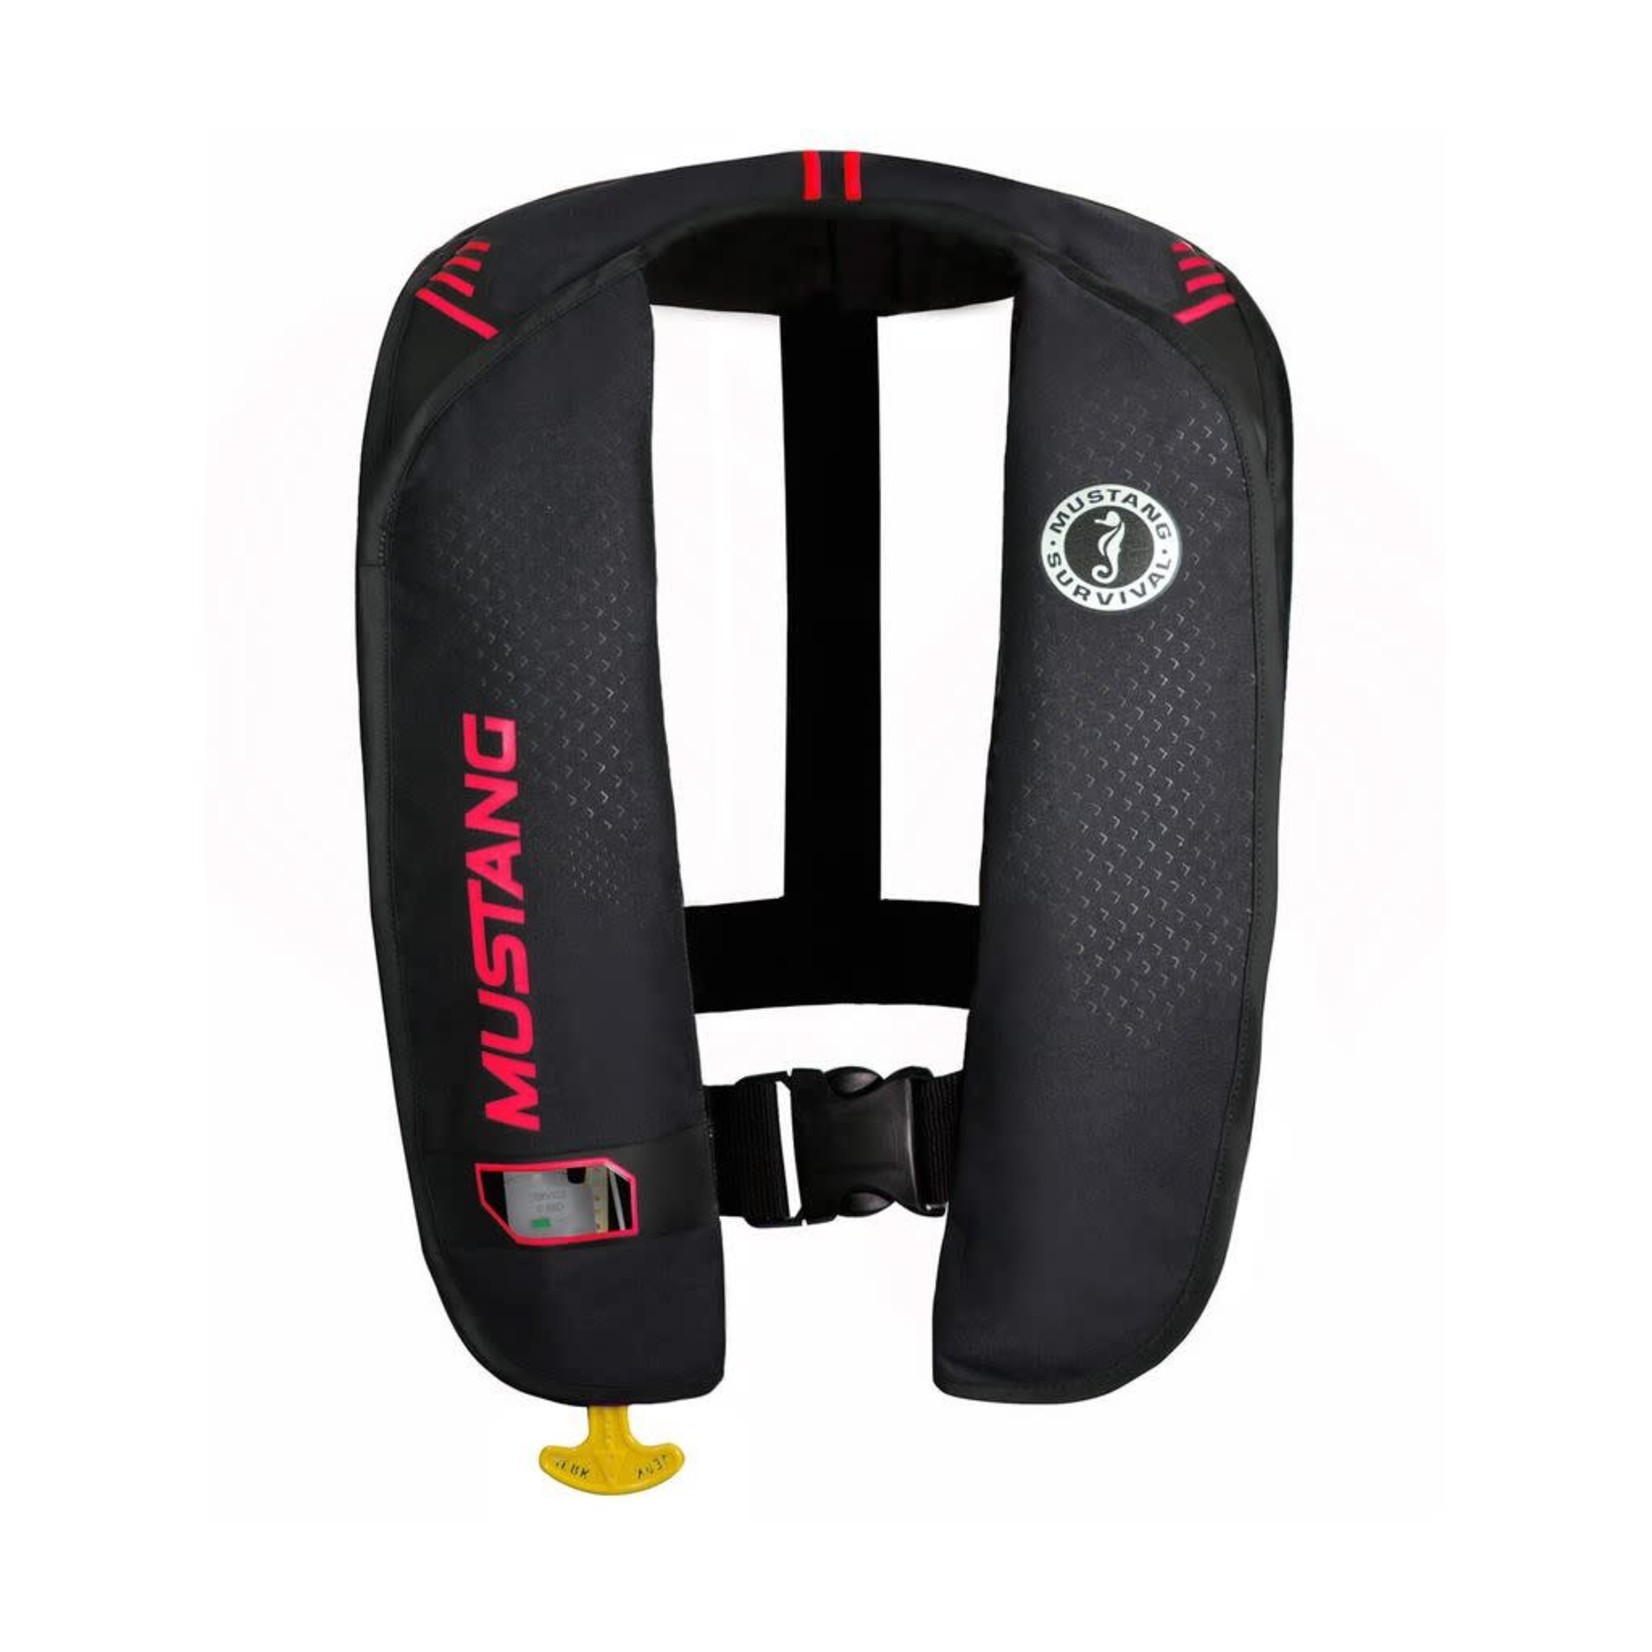 Mustang Survival Mustang Survival M.I.T. 100 Inflatable PFD (Manual)